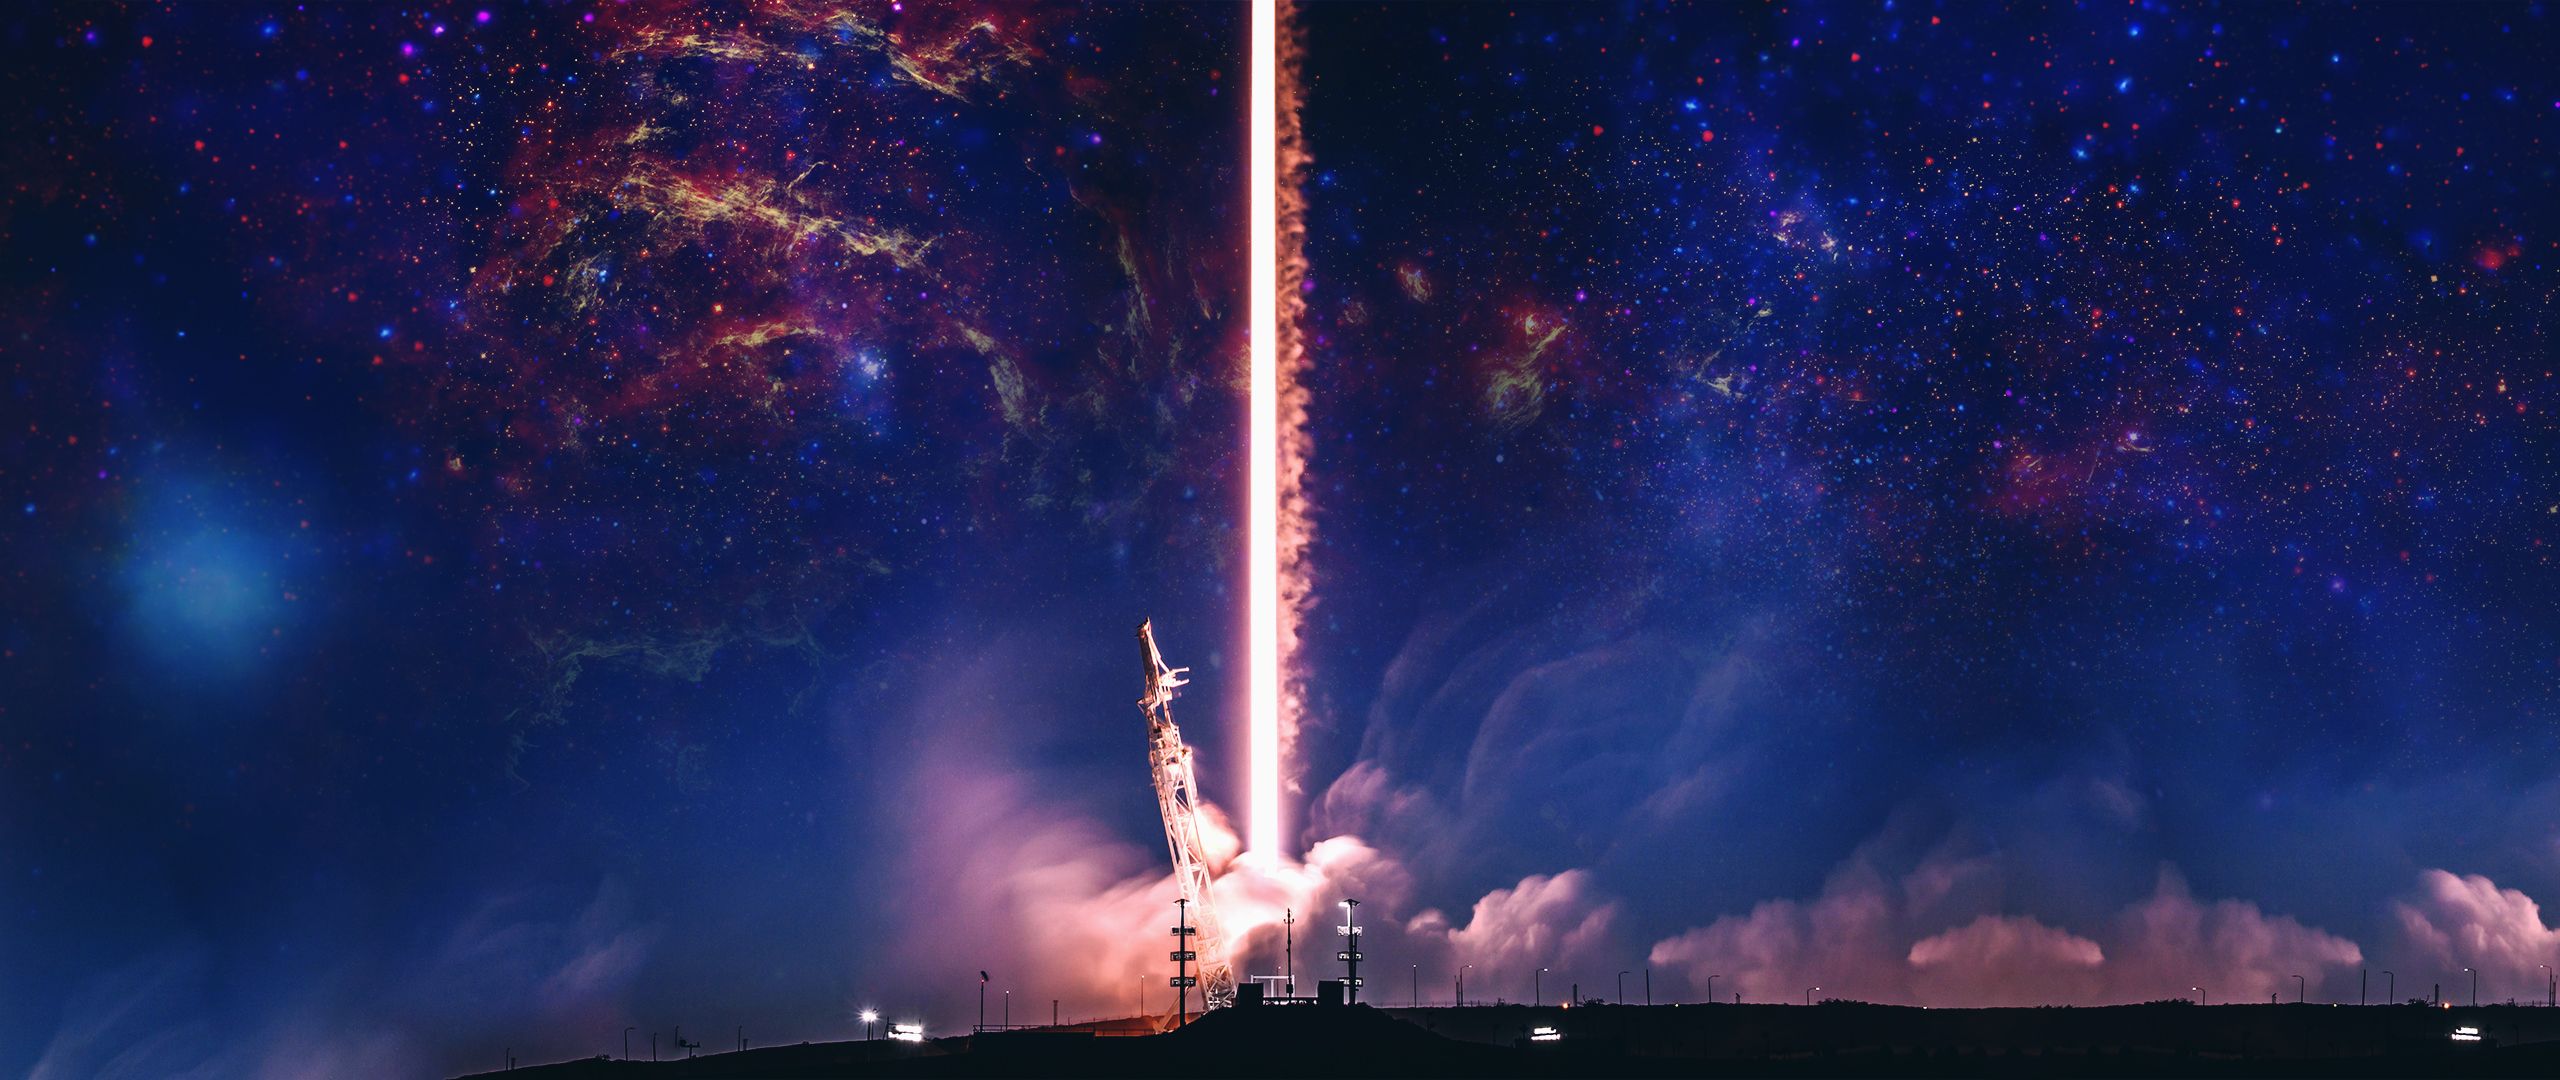 8 Cool SpaceX Rocket background wallpapers for phone